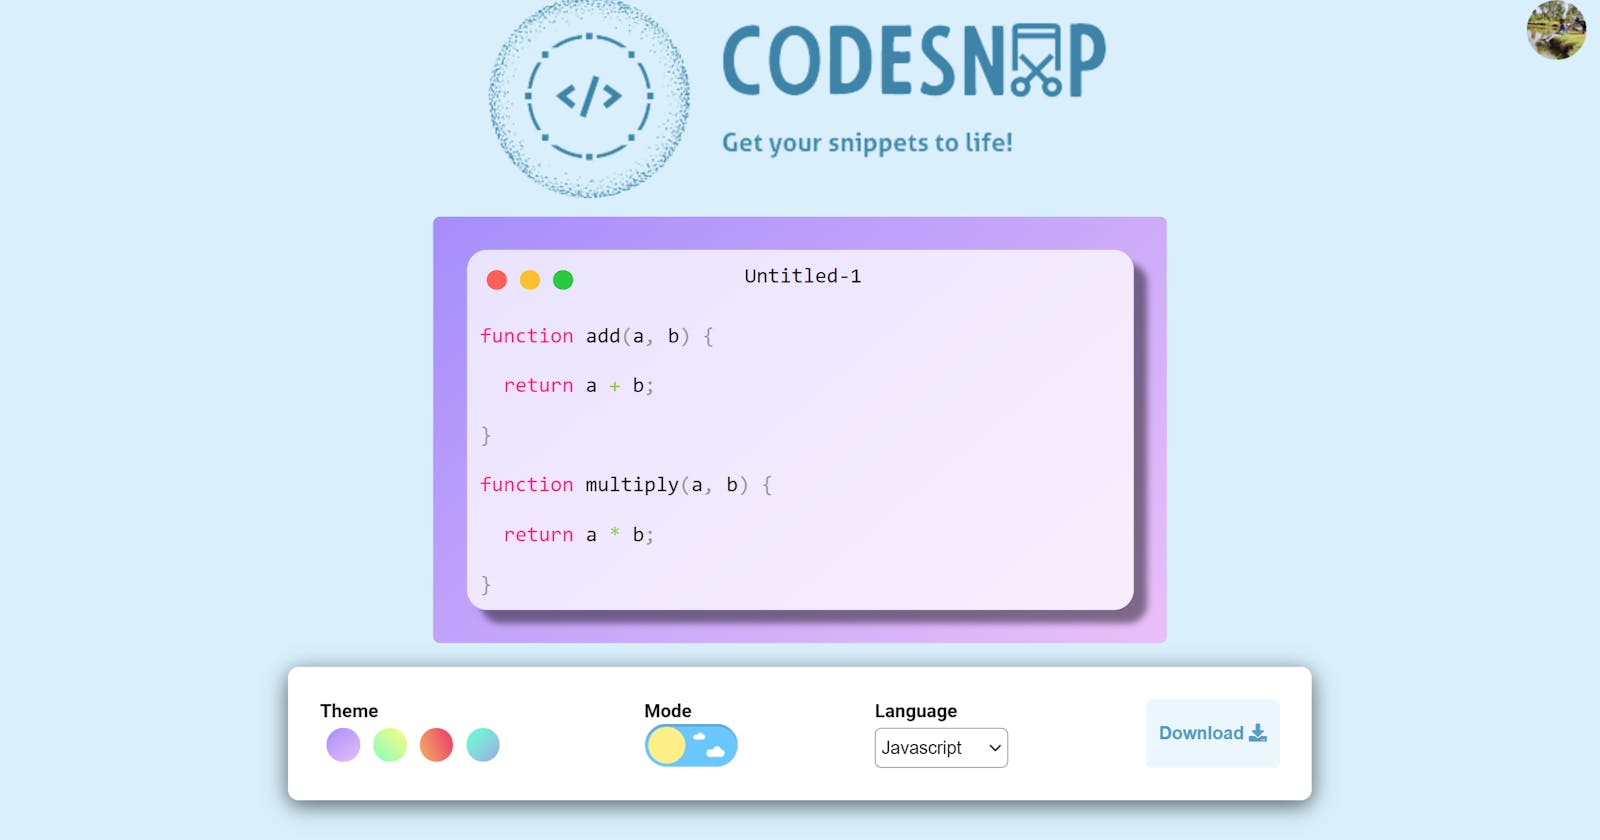 Introducing CodeSnap - Get your code snippets to life! 💻✨